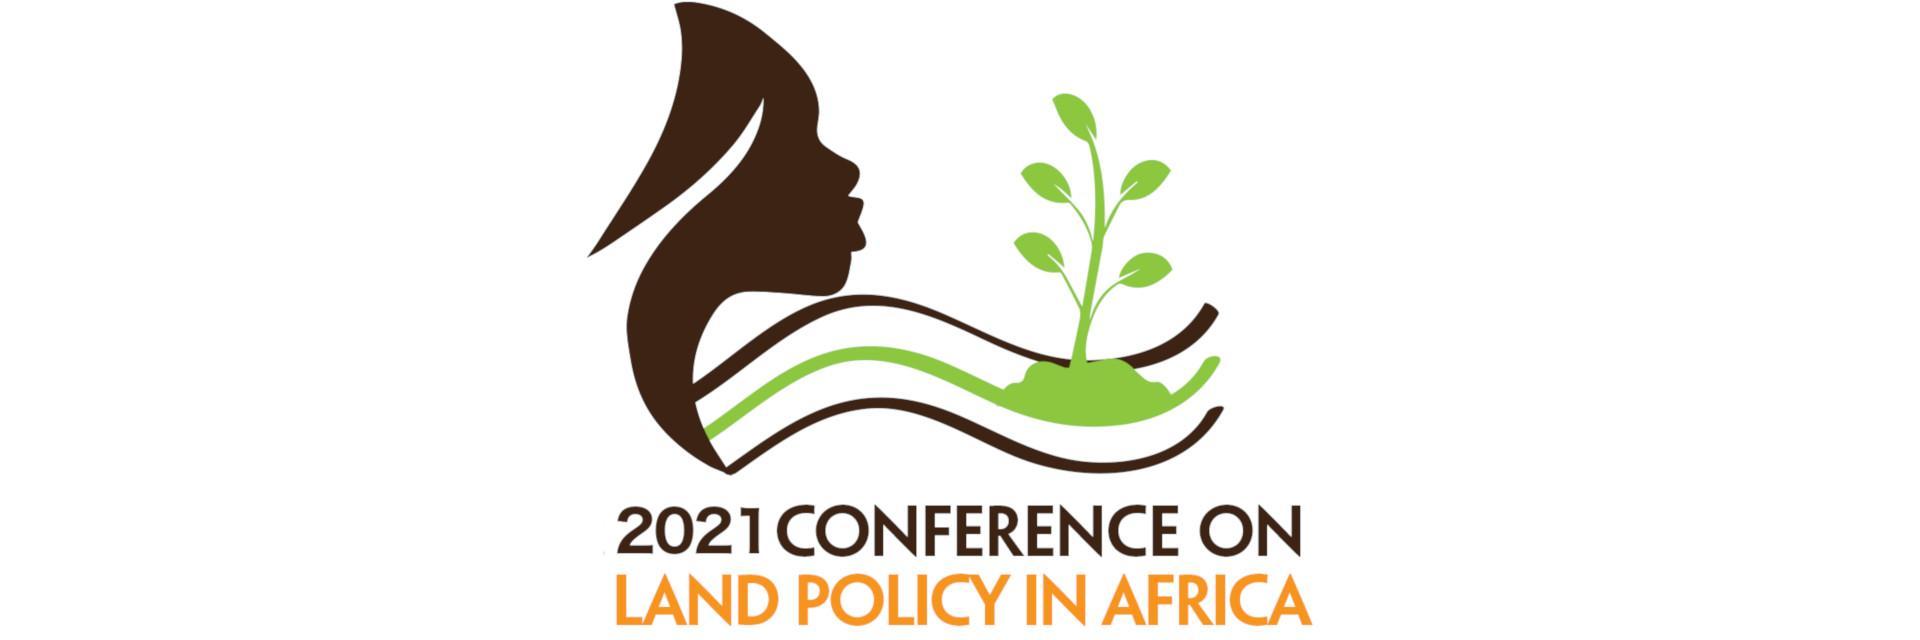 Rwanda to host the 2021 Conference on Land Policy in Africa